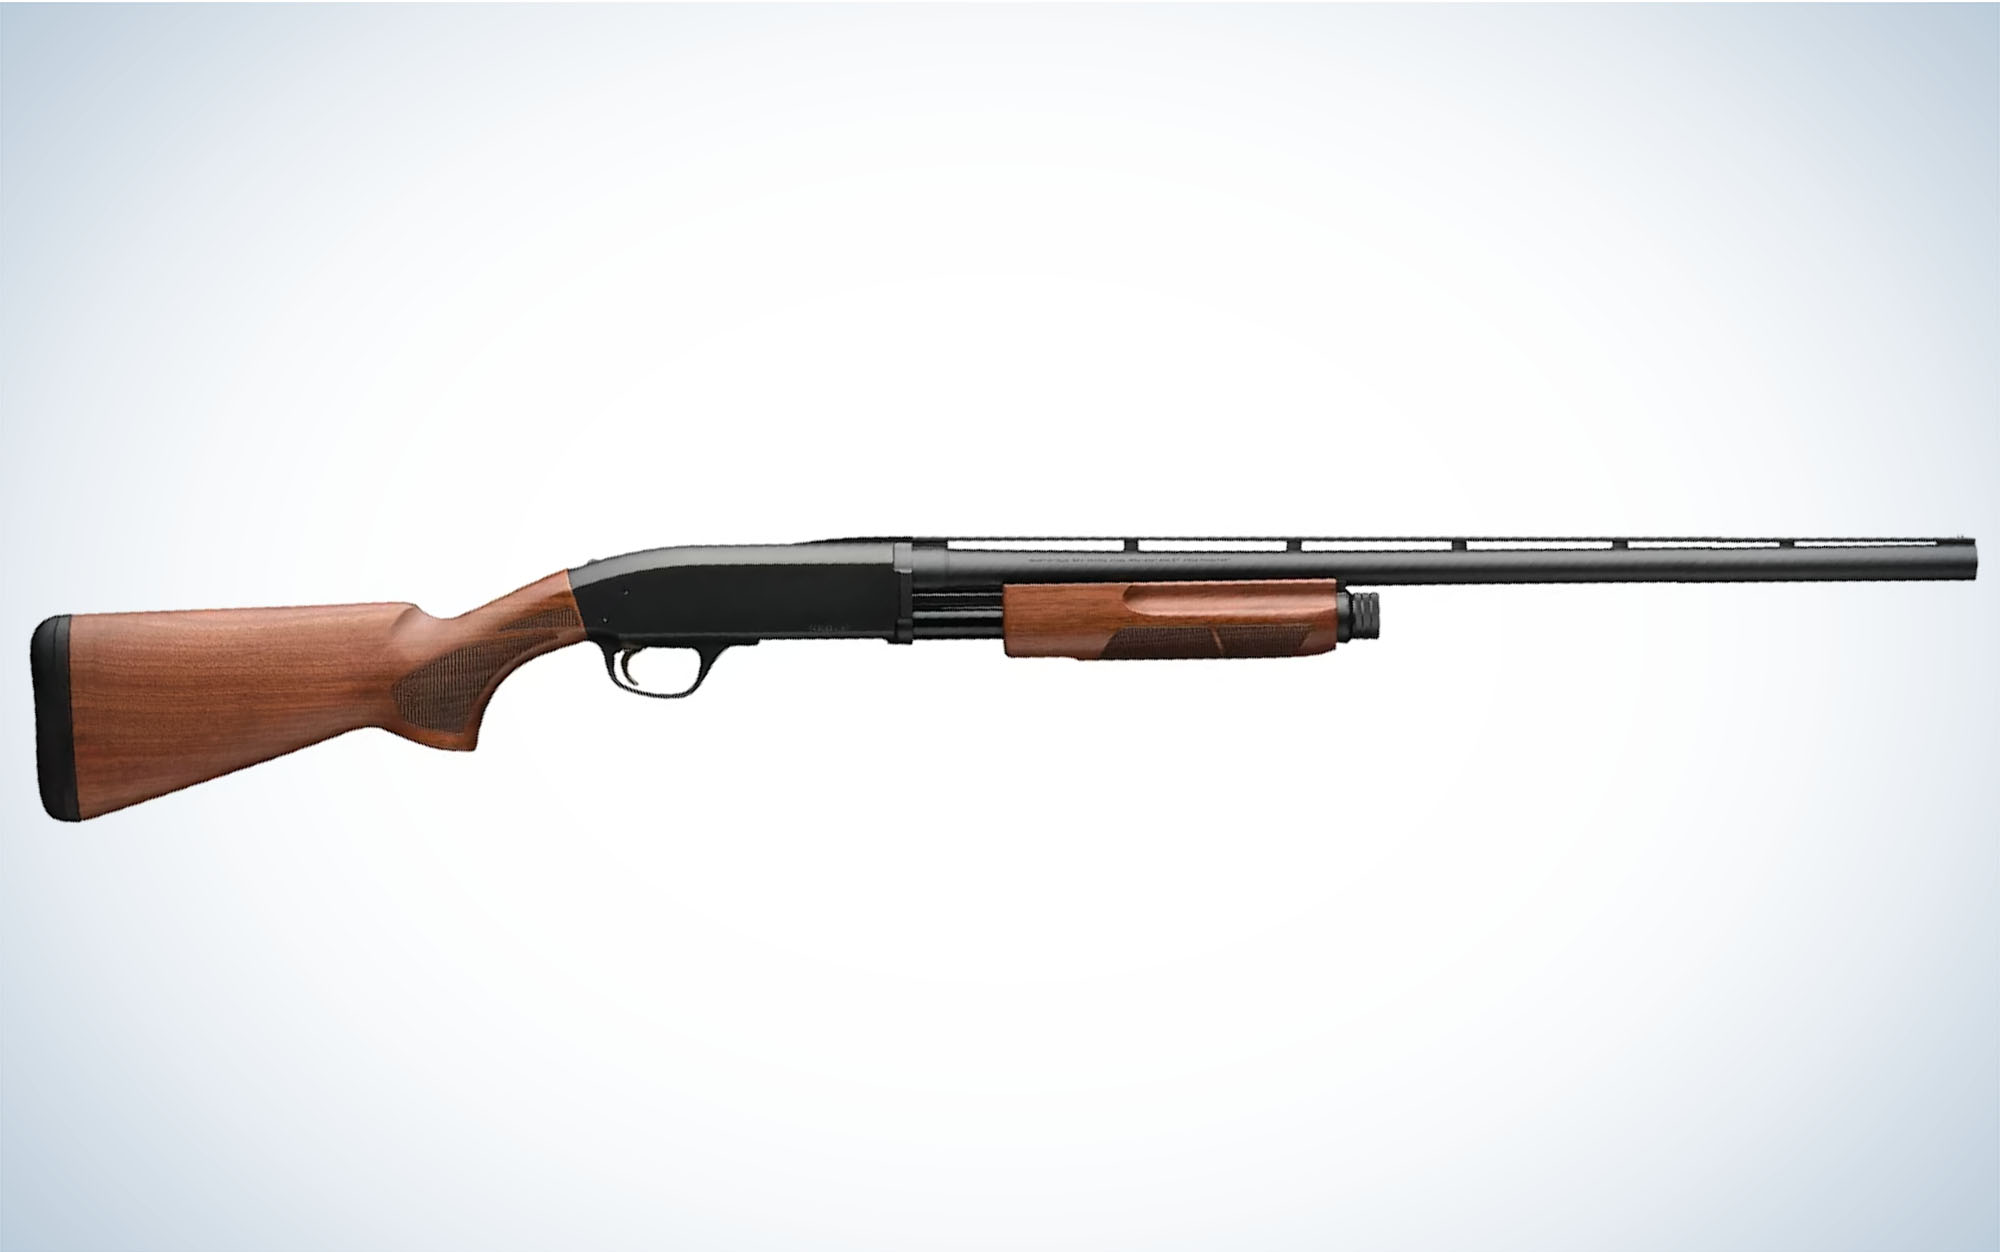 The Browning BPS could replace the Remington 870.